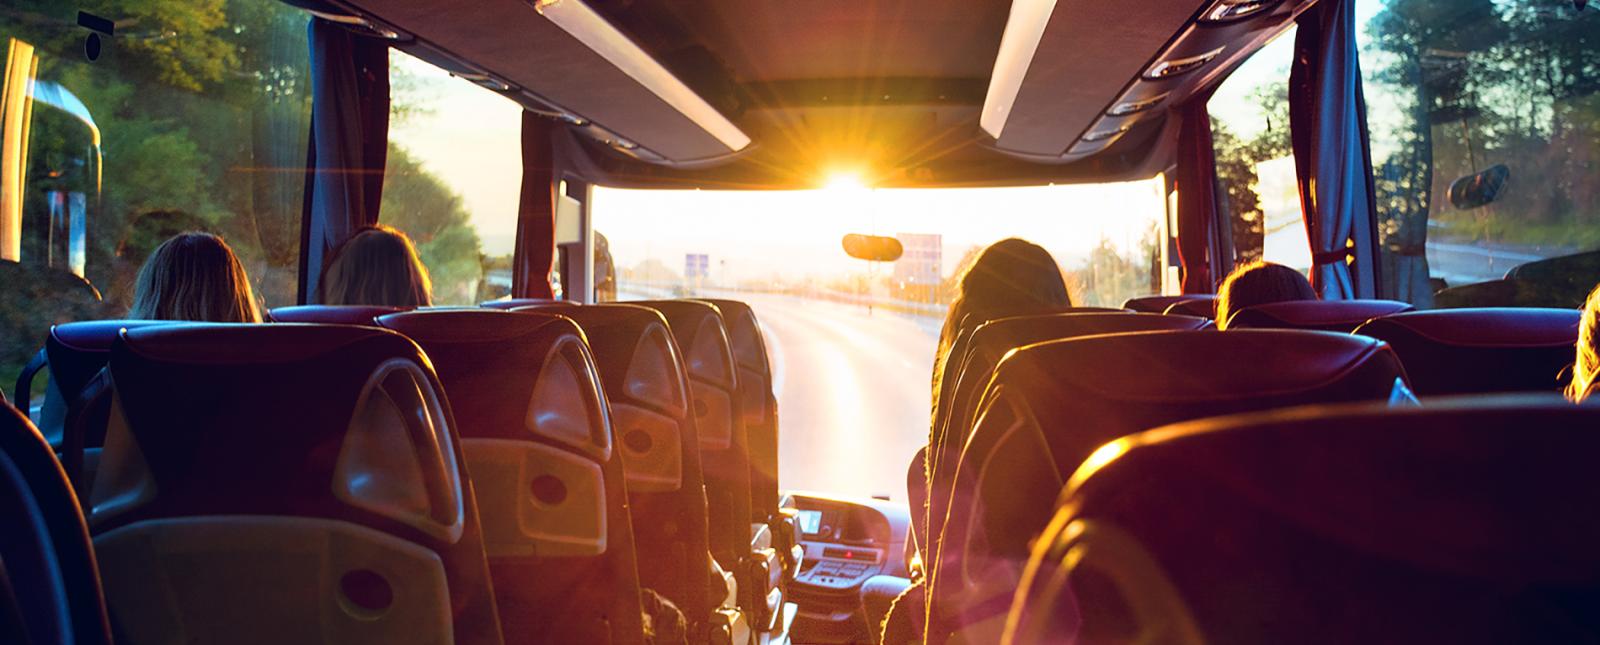 Bus tour into the sunset (CTvisit)